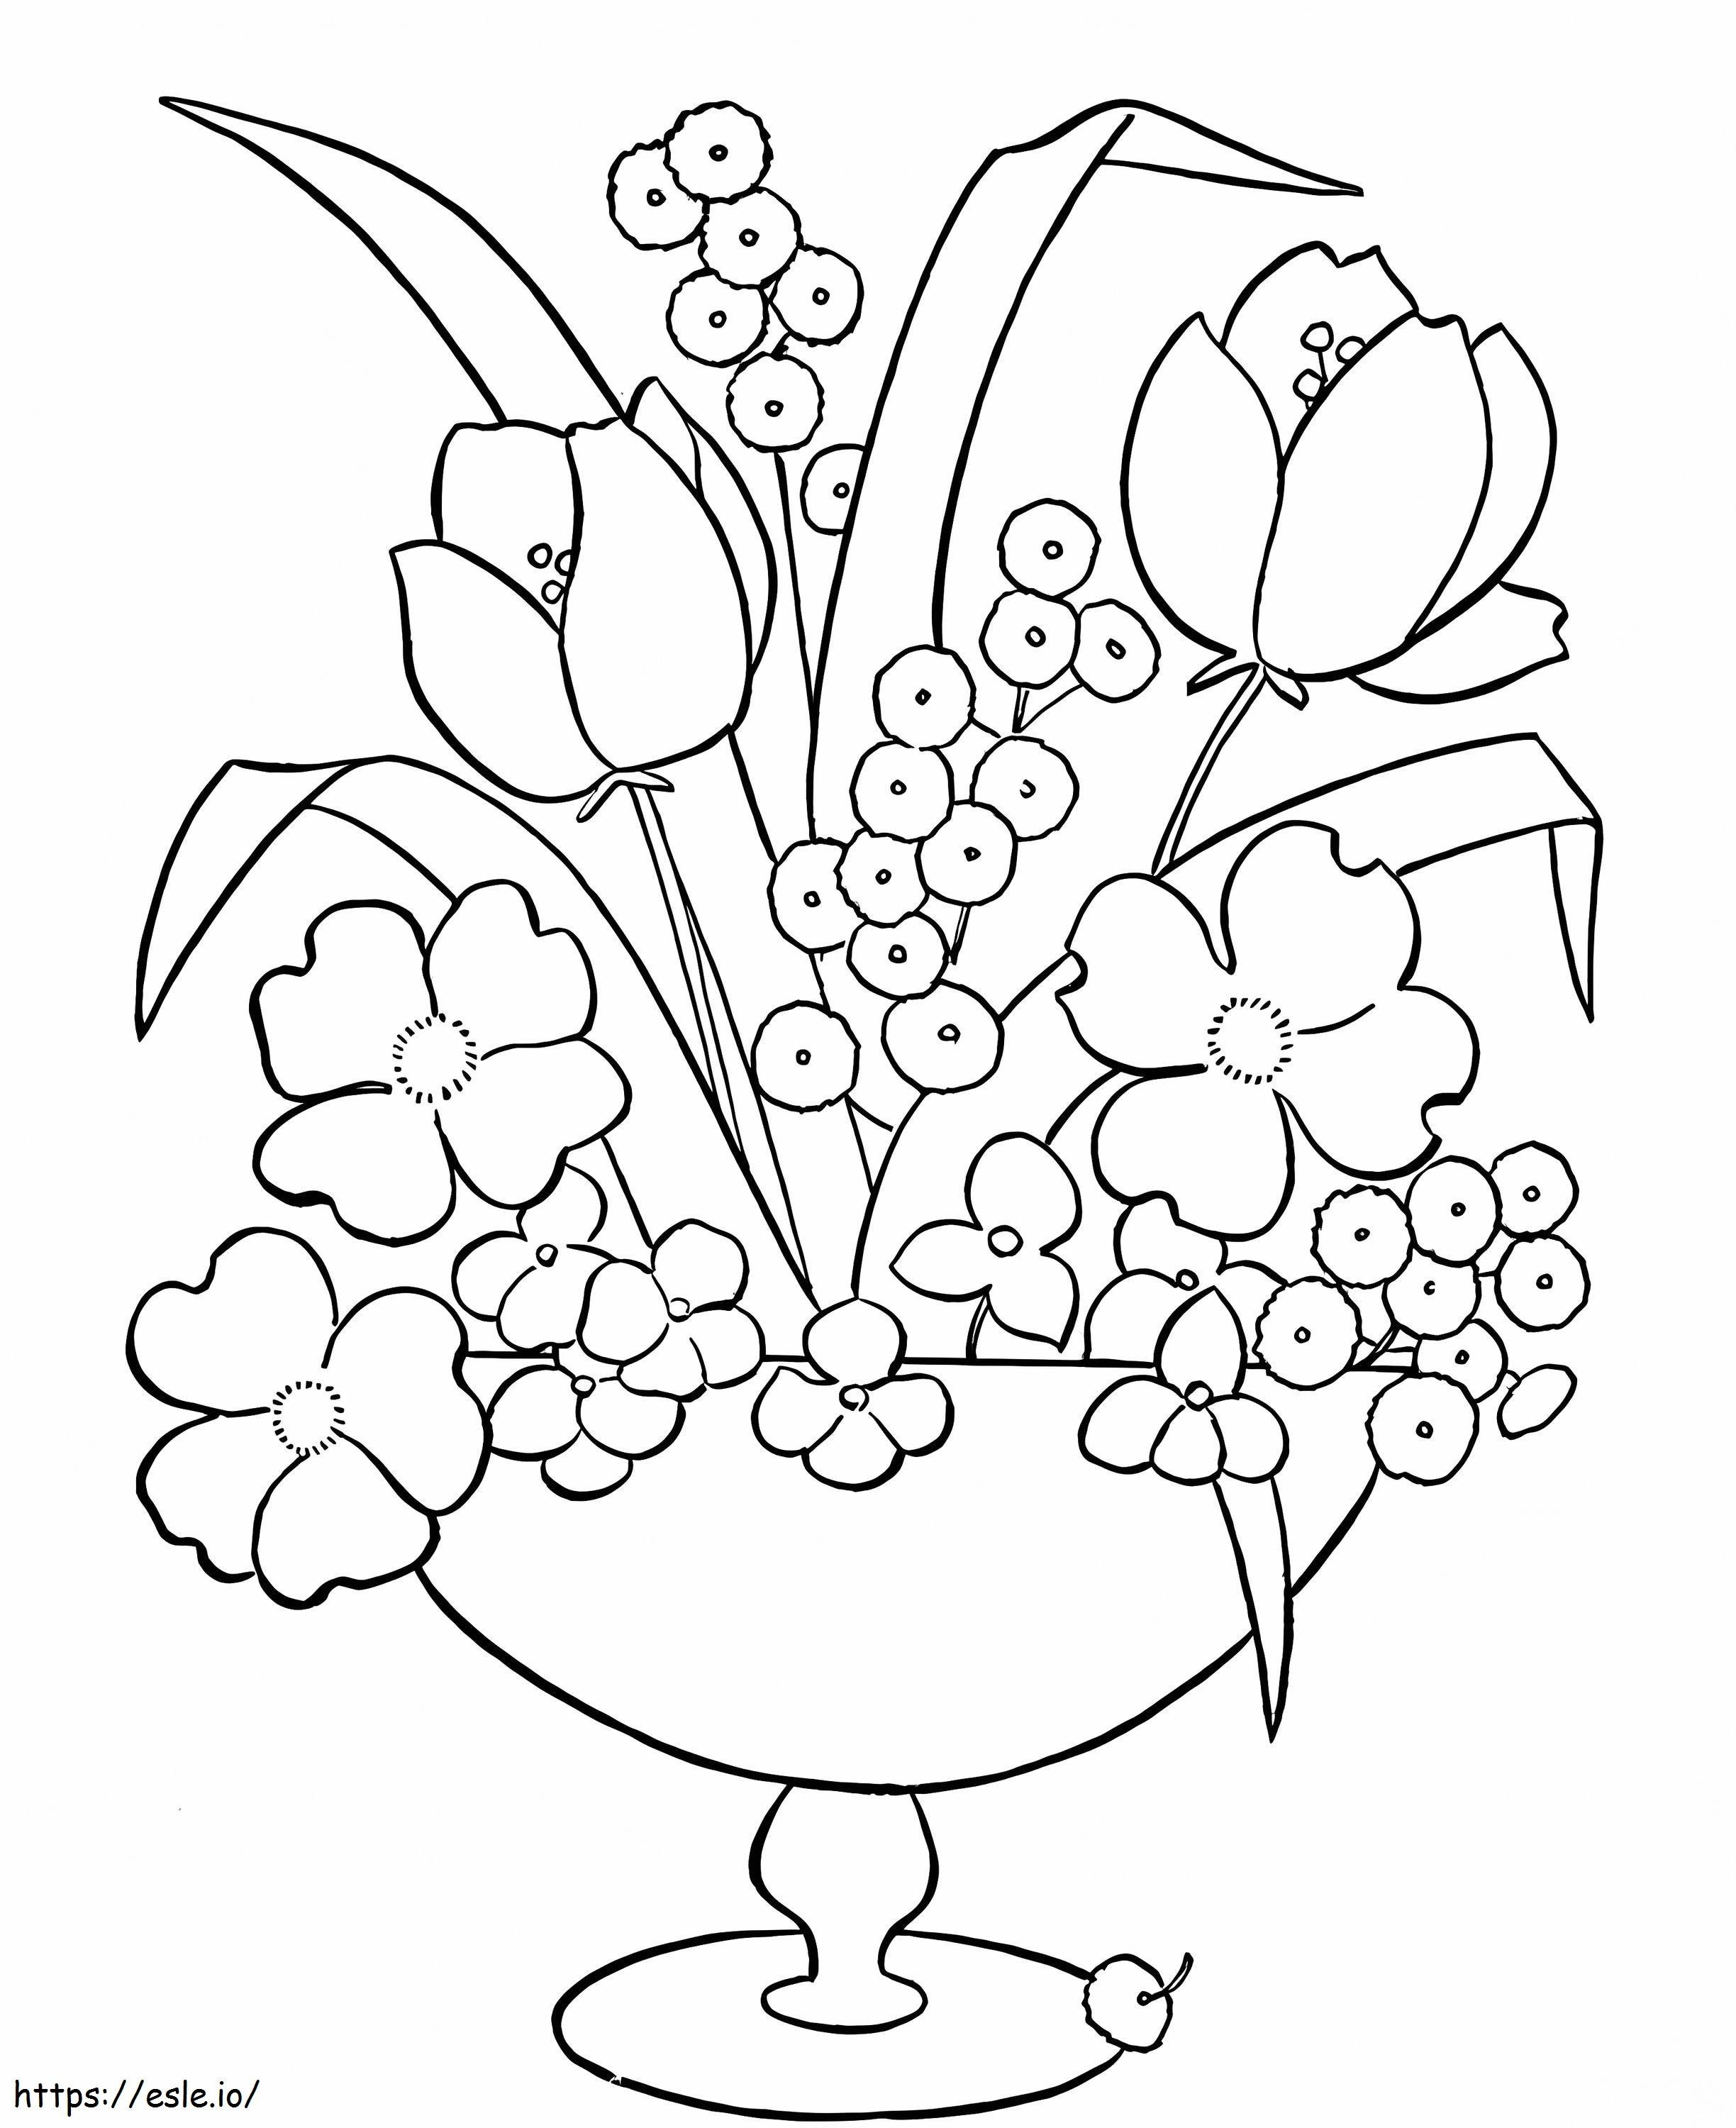 Flower Vase 7 coloring page